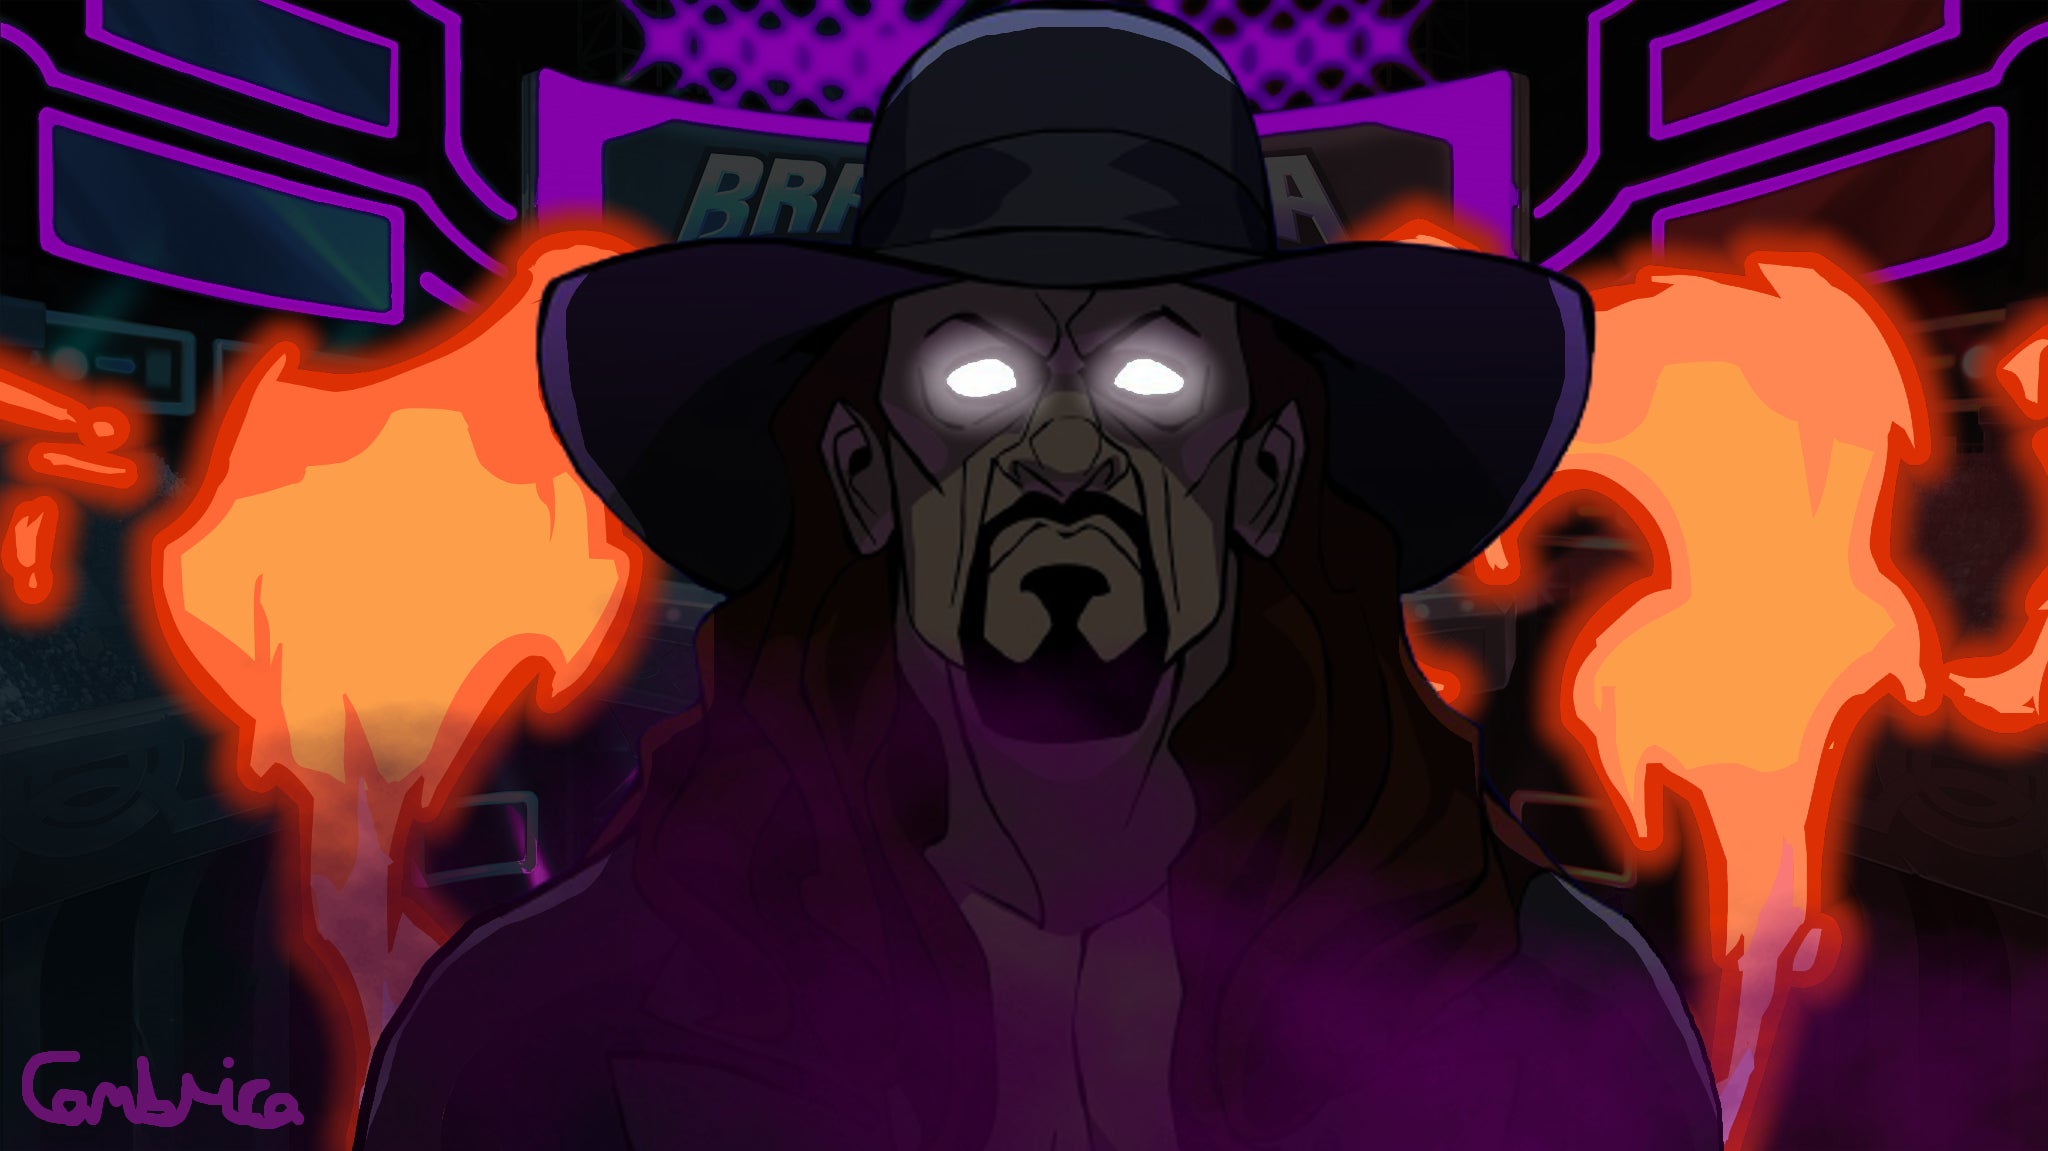 Made a wallpaper of The Undertaker